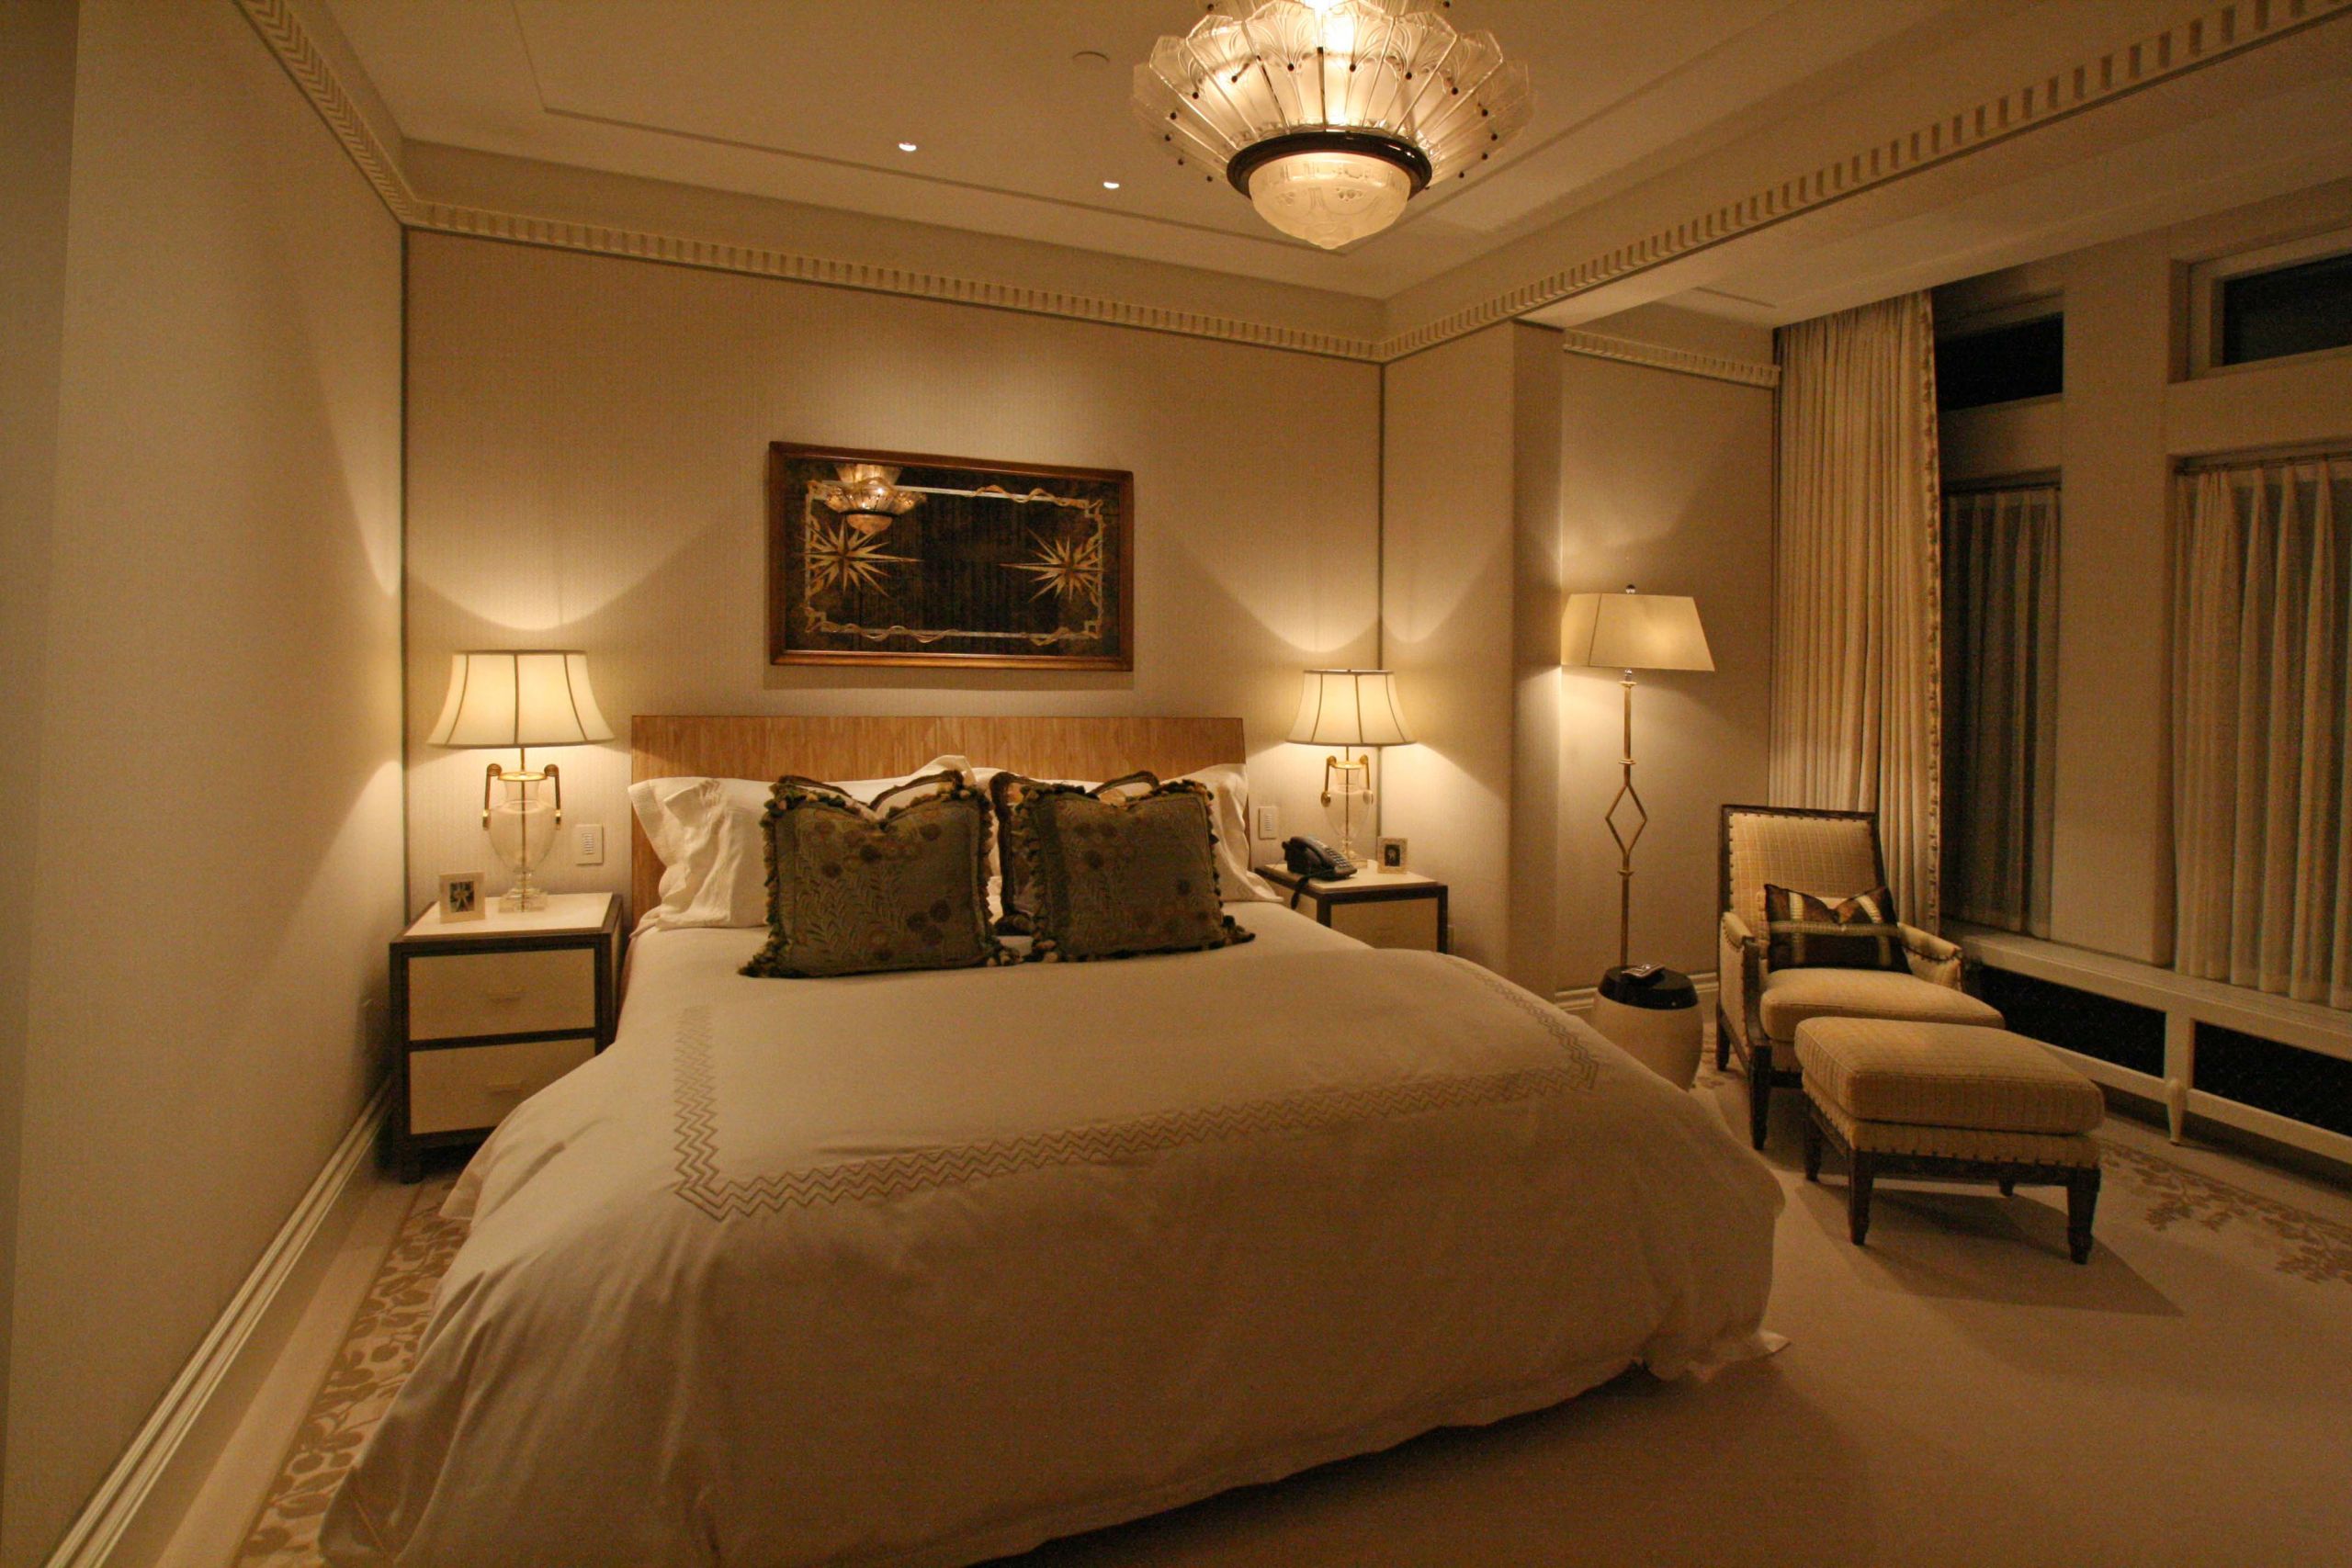 Lantern Lights For Bedroom
 Here are the Best Lights that Create a Warm & Cosy Bedroom